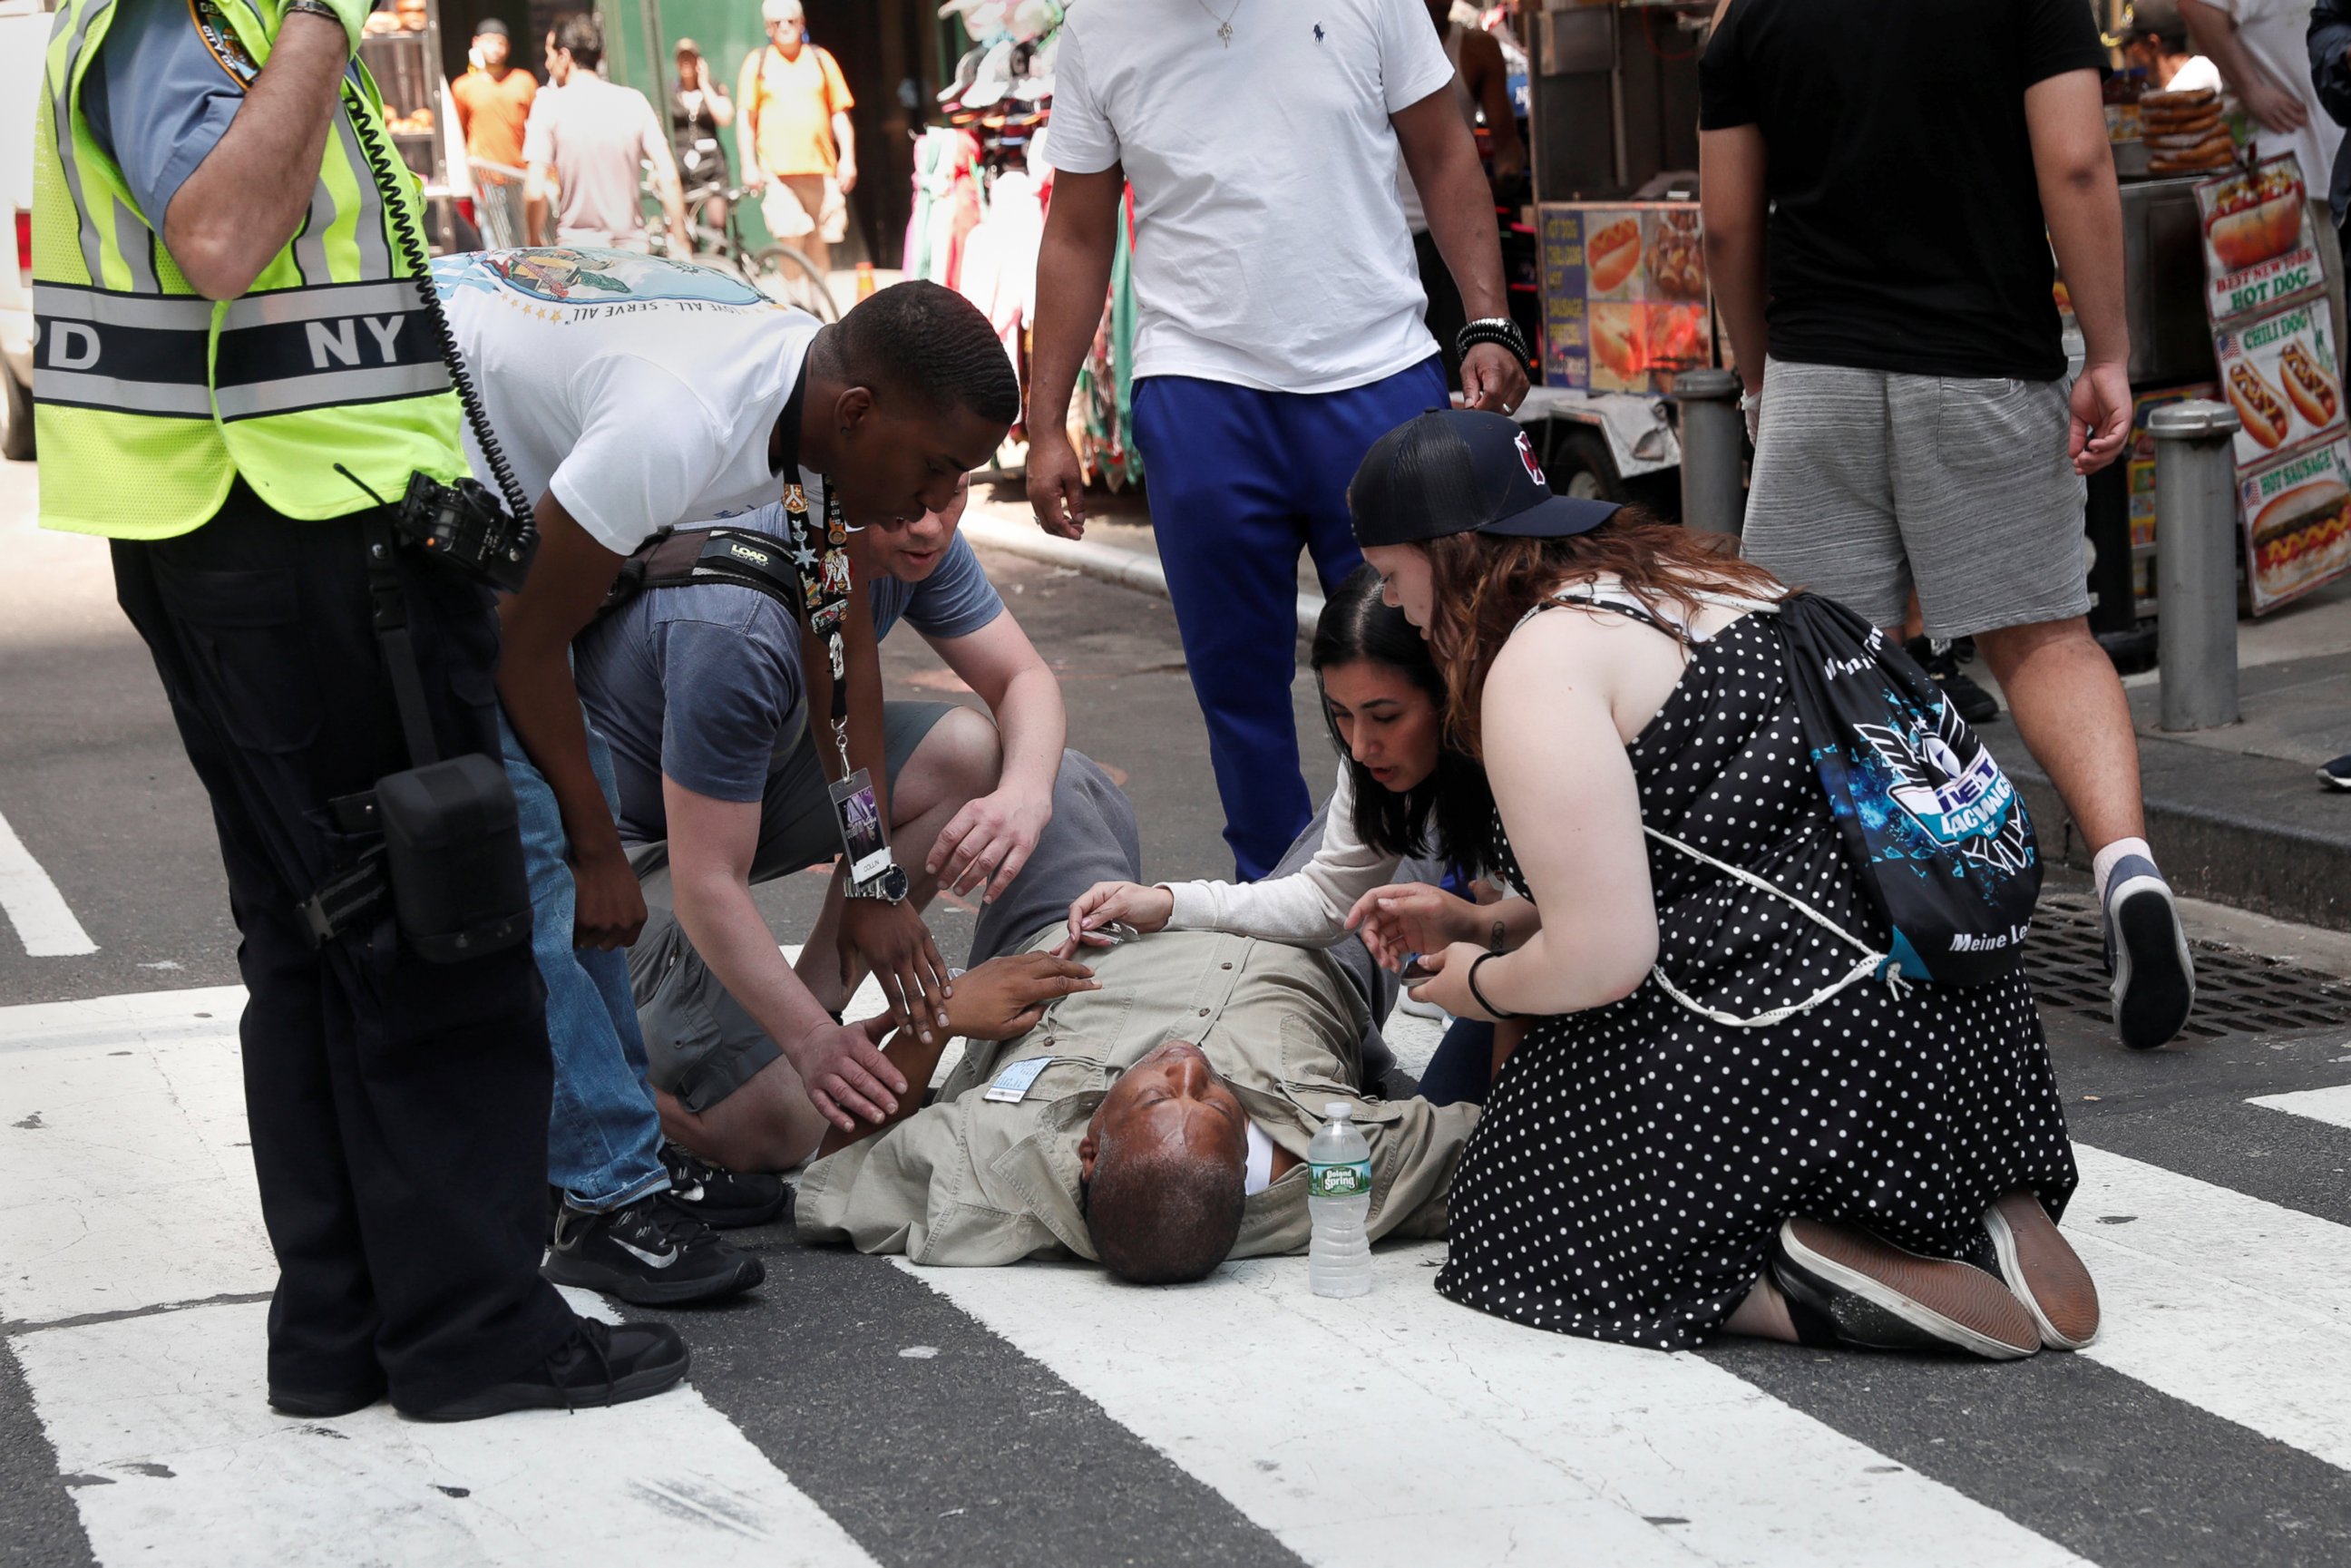 PHOTO: An injured man is helped on the sidewalk in Times Square after a speeding vehicle struck pedestrians on the sidewalk in New York City, May 18, 2017.